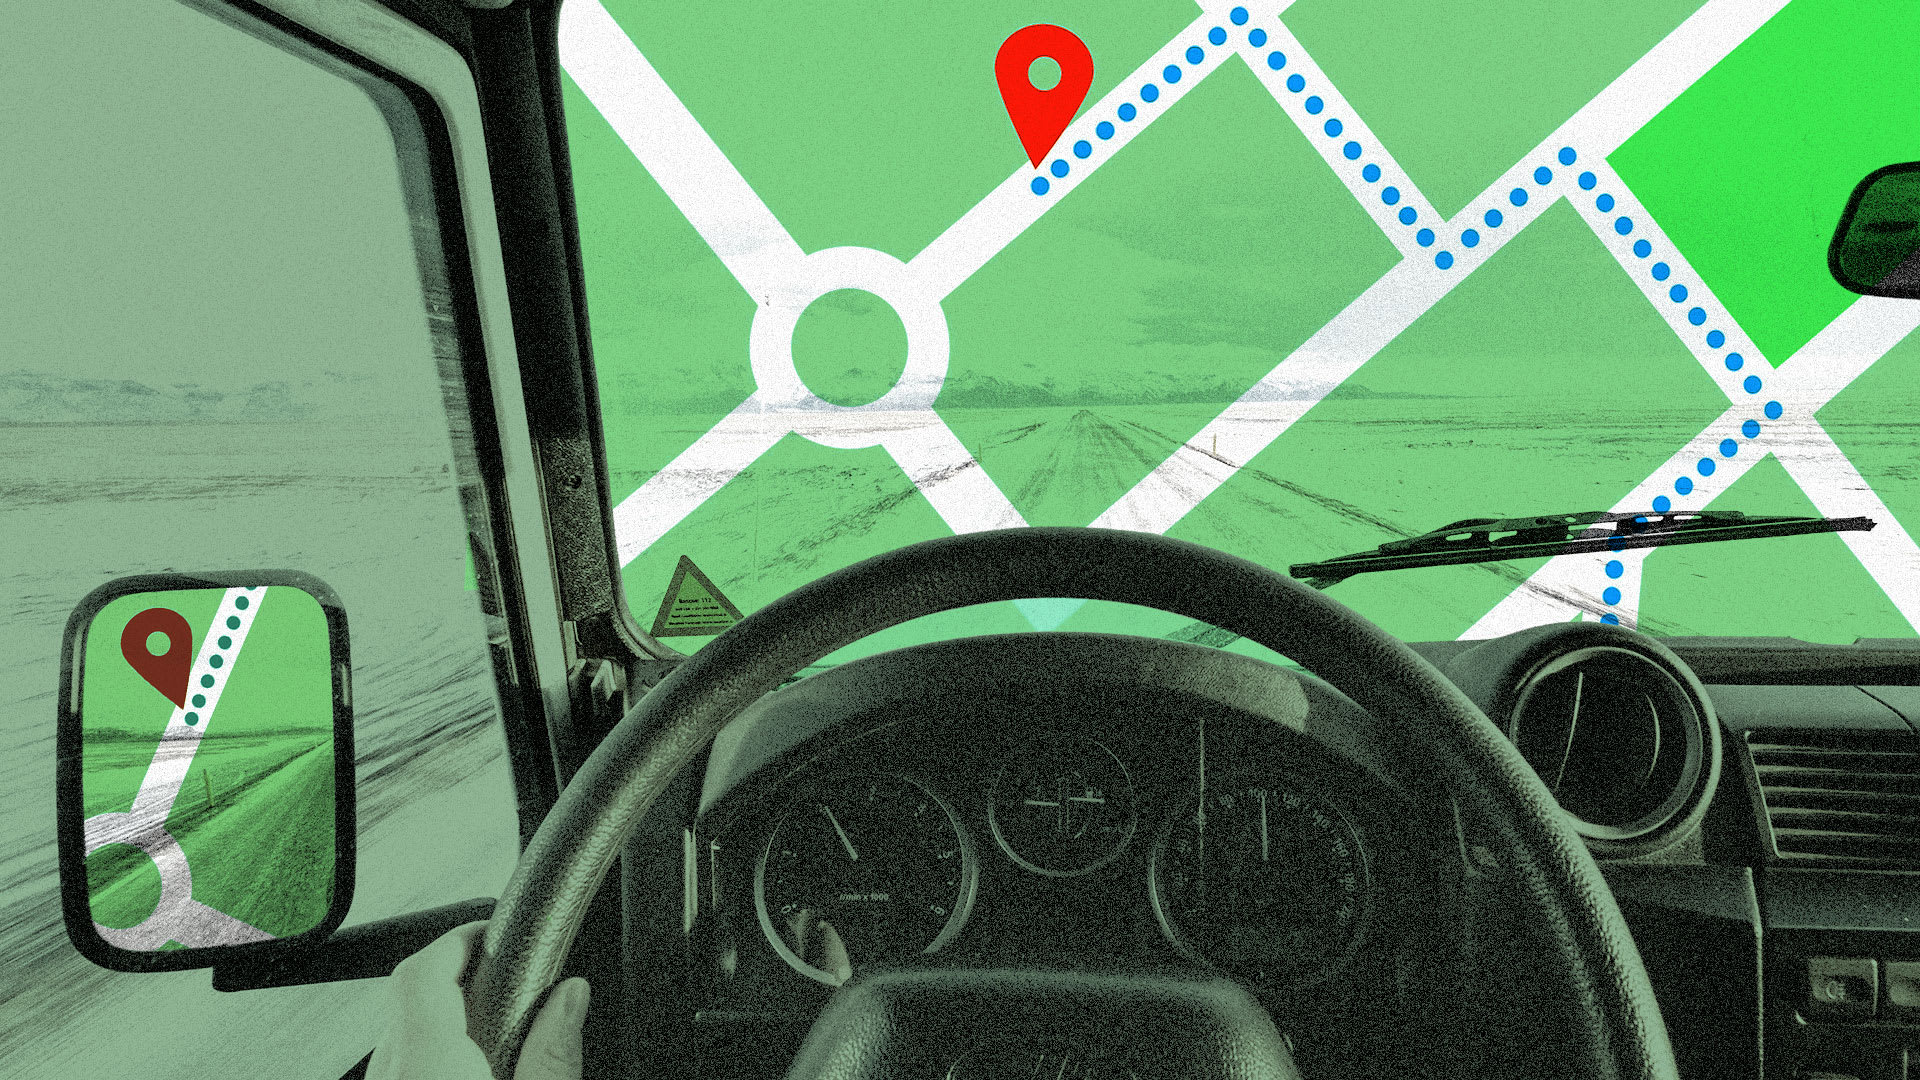 5 Google Maps tricks to make your travels more efficient, fast, and fun